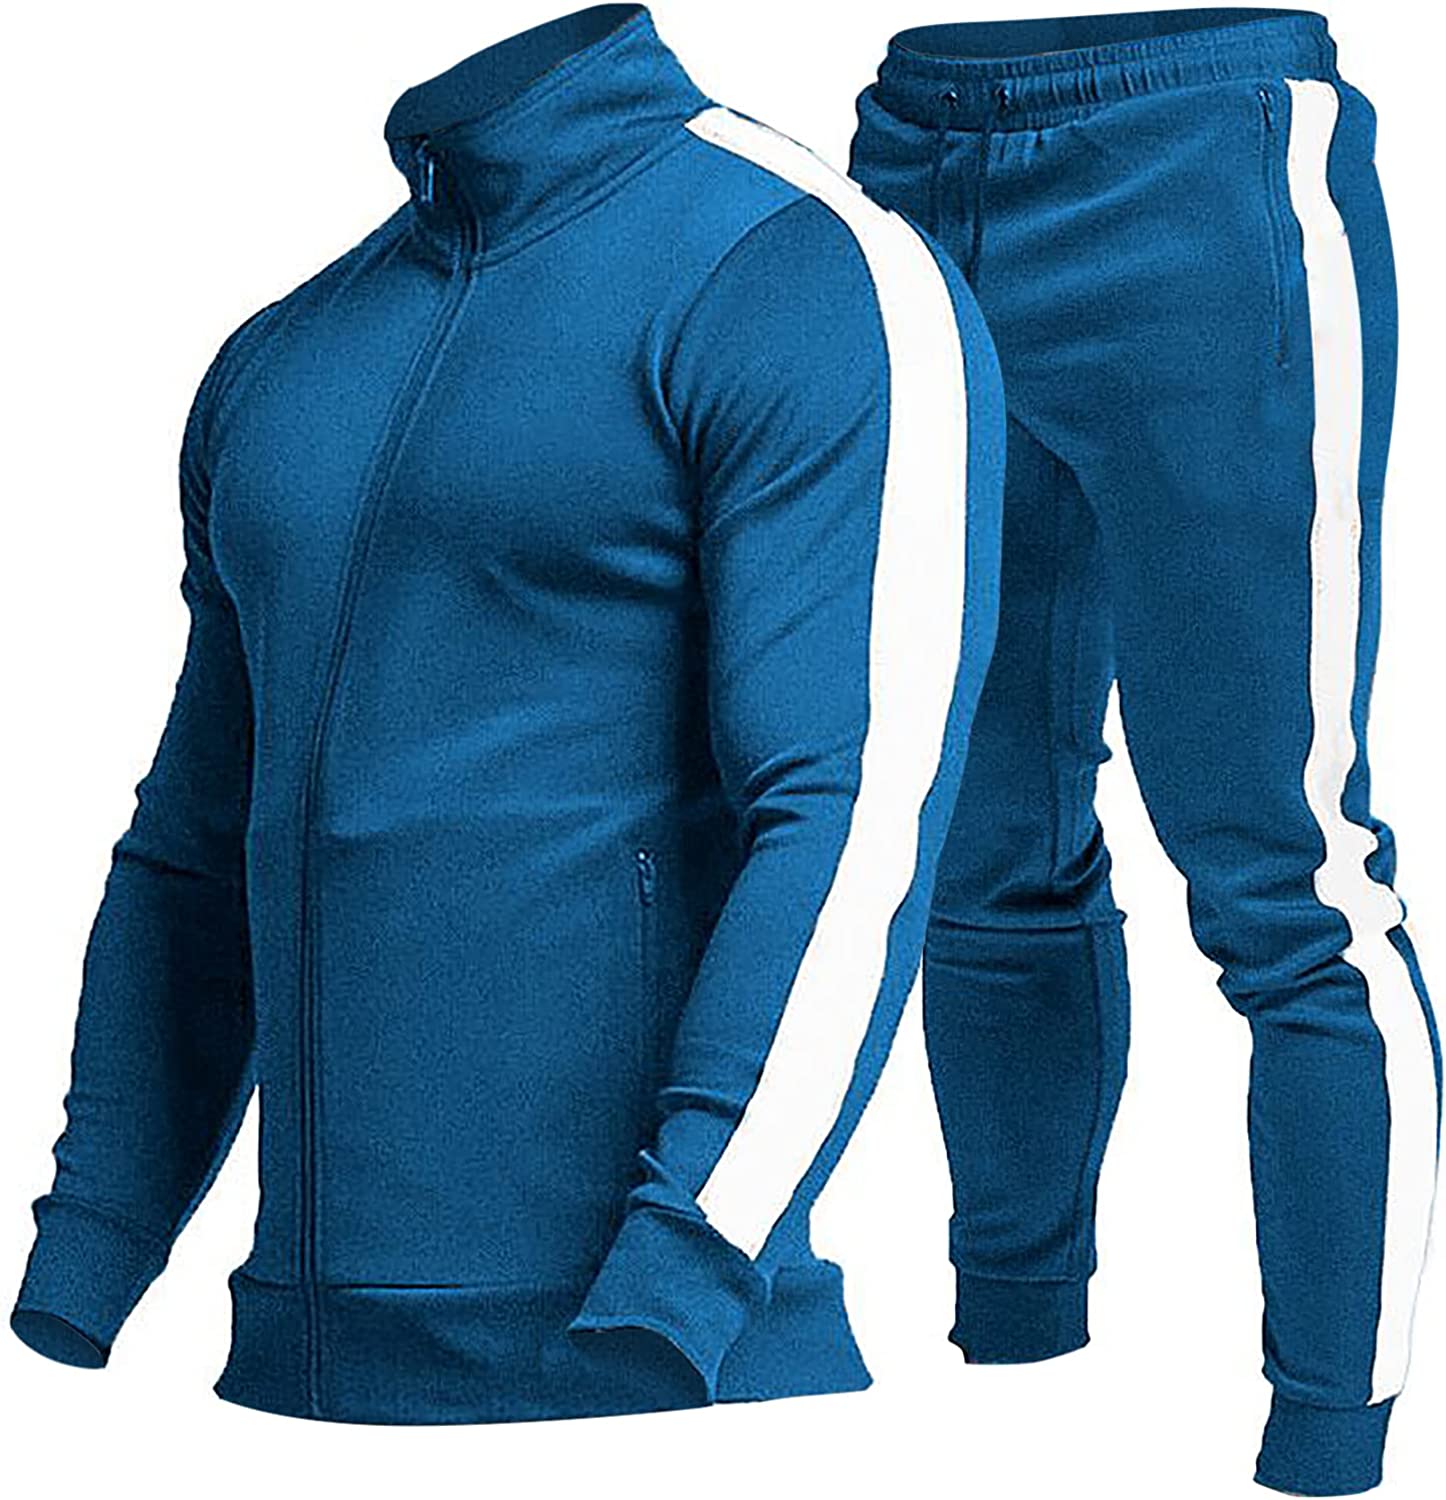 TEZO Men's Casual Active Tracksuits Full Zip Sports Jogging Suits Sets  Athletic Running 2 Piece Sweatsuits with Zip Pockets(AGWT S) at   Men's Clothing store